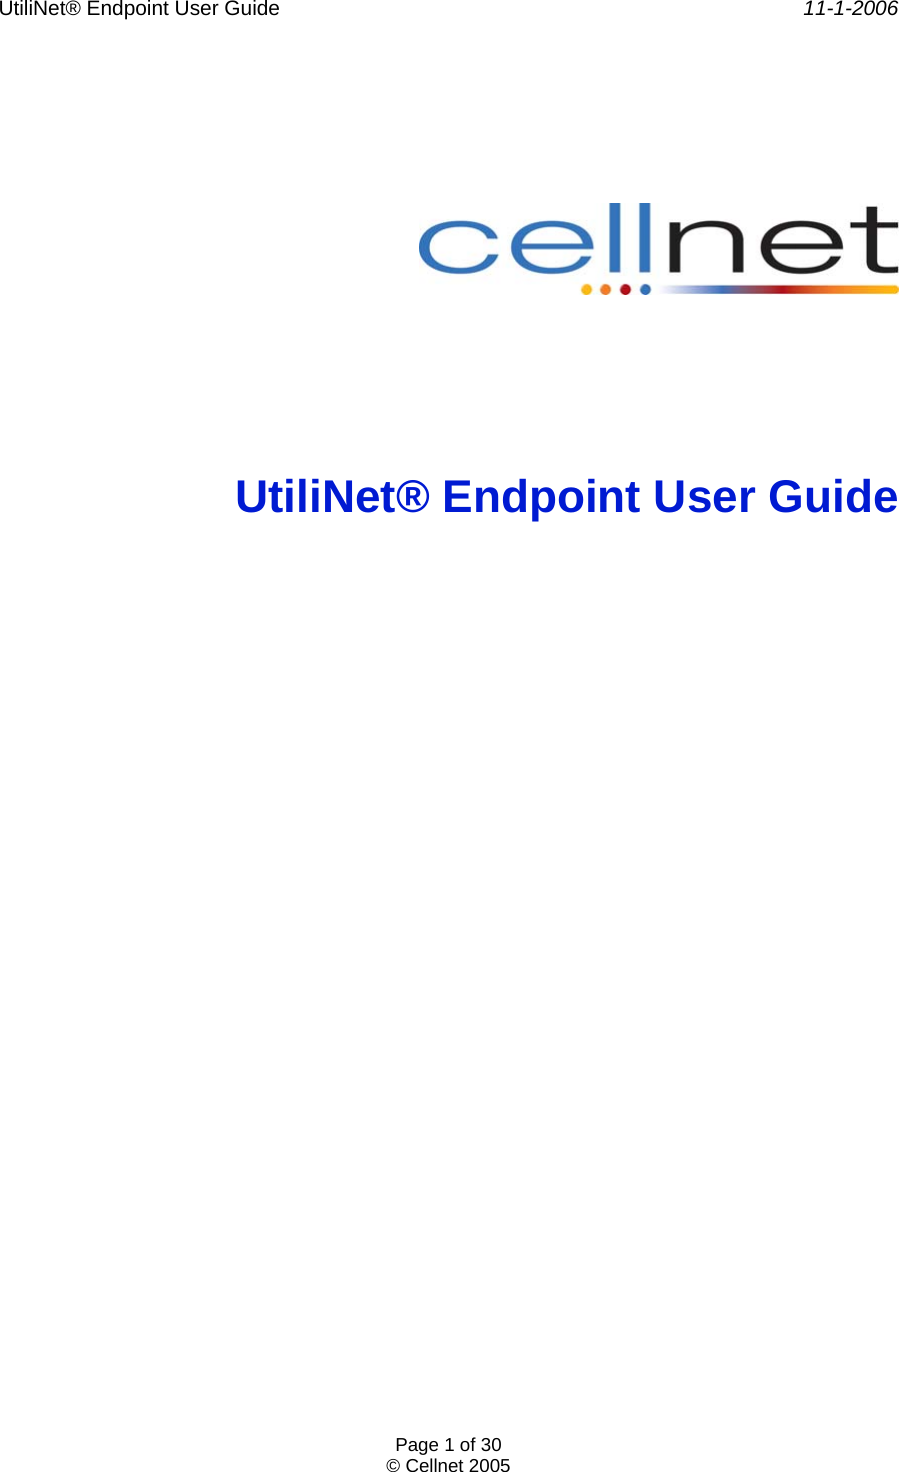 UtiliNet® Endpoint User Guide    11-1-2006 Page 1 of 30 © Cellnet 2005        UtiliNet® Endpoint User Guide   